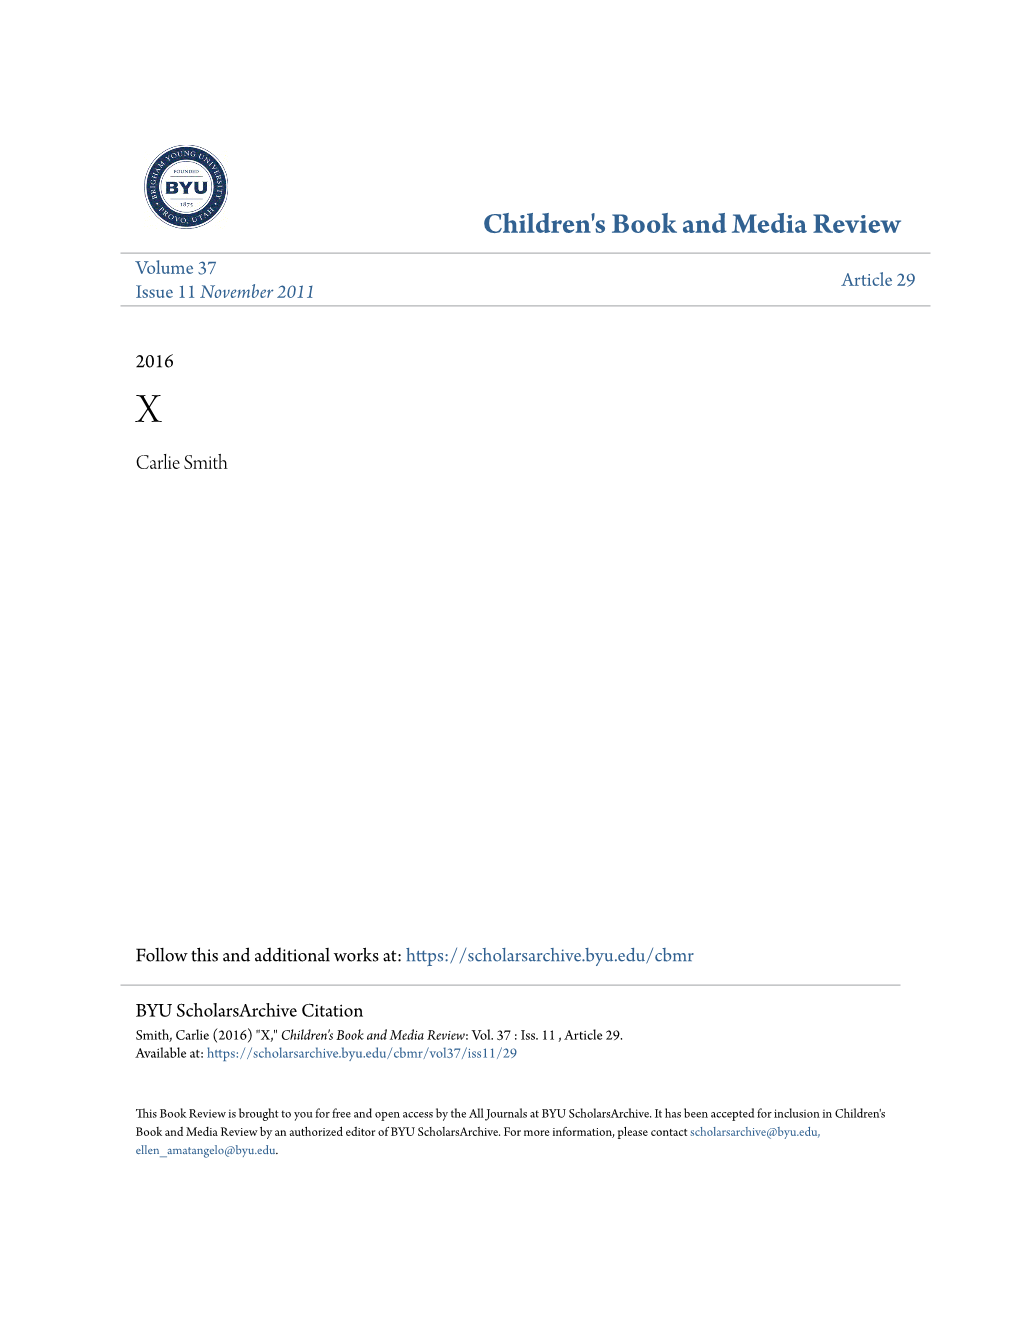 Children's Book and Media Review Volume 37 Article 29 Issue 11 November 2011